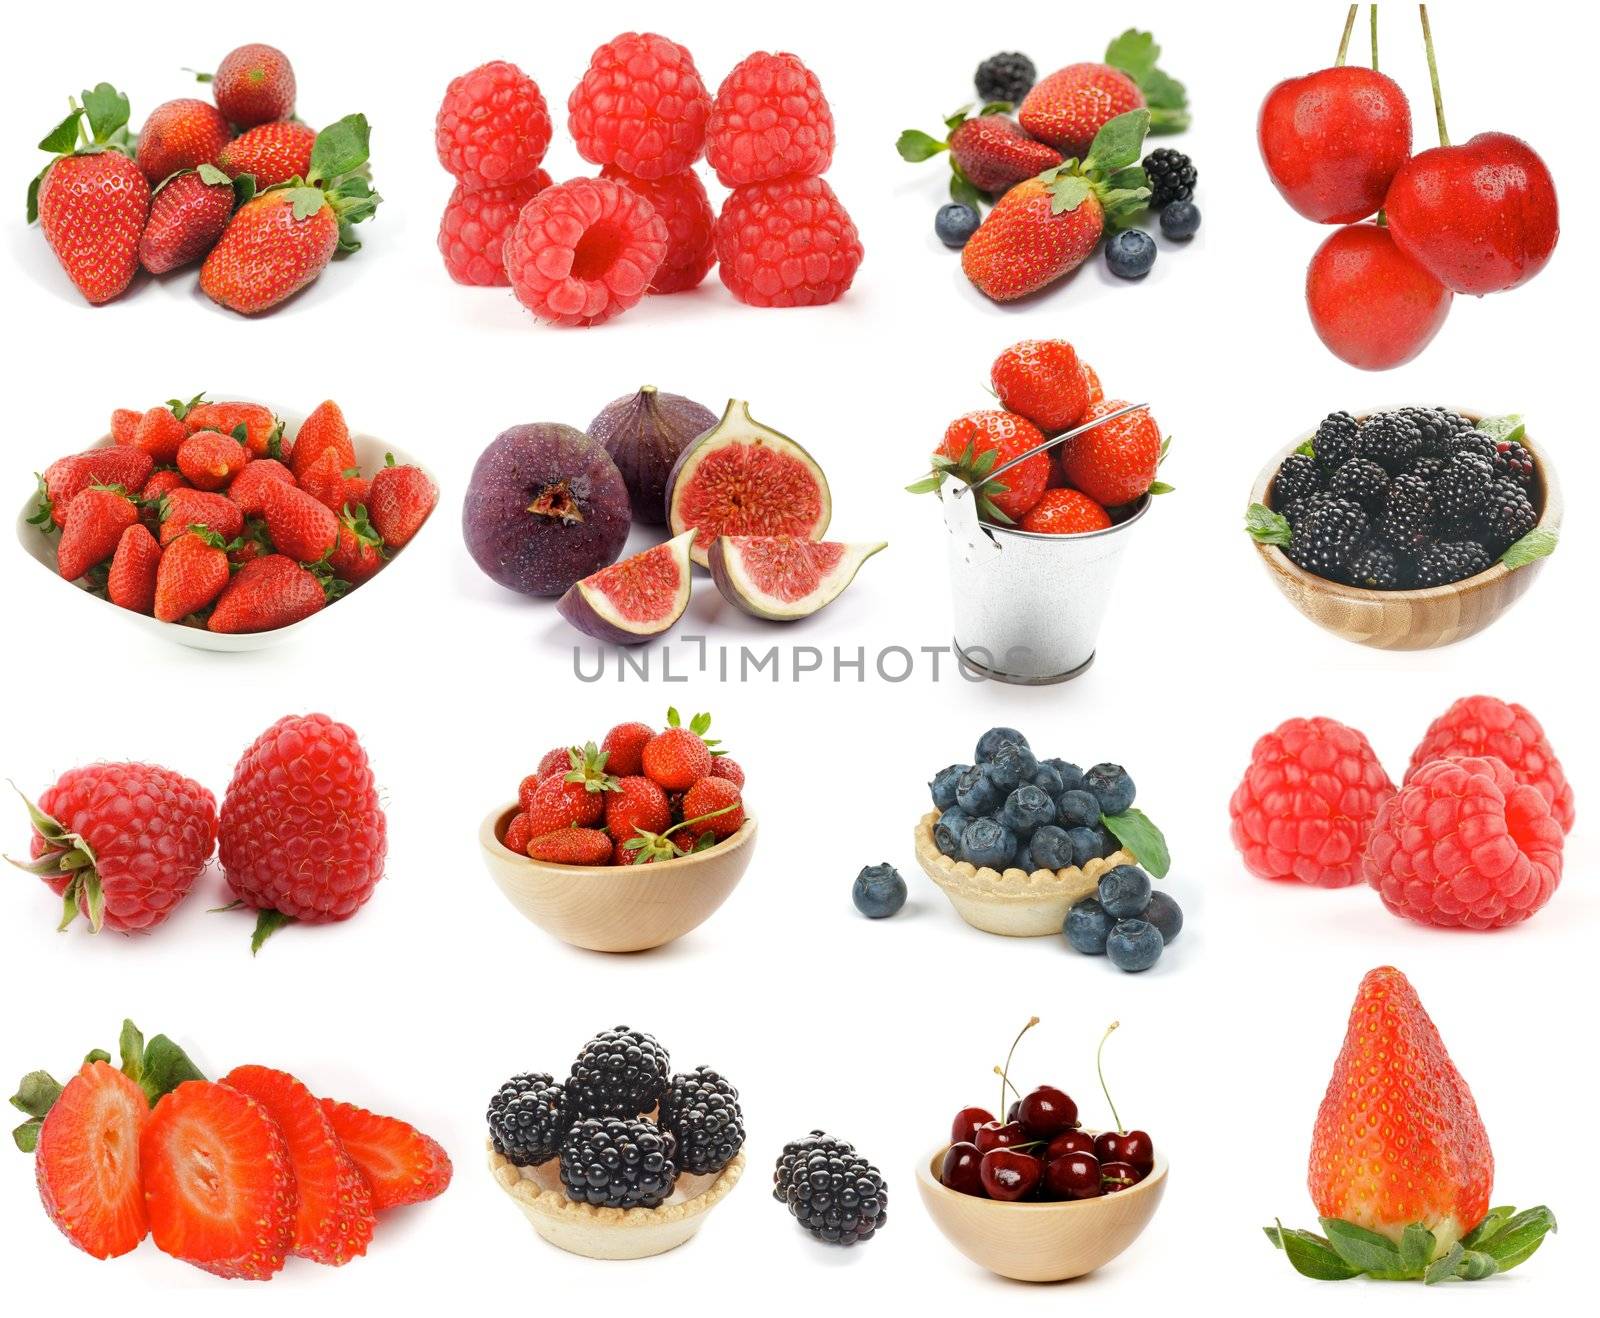 Collection of Berries with Strawberry, Raspberry, Cherry, Blackberry, Blueberry and Figs isolated on white background